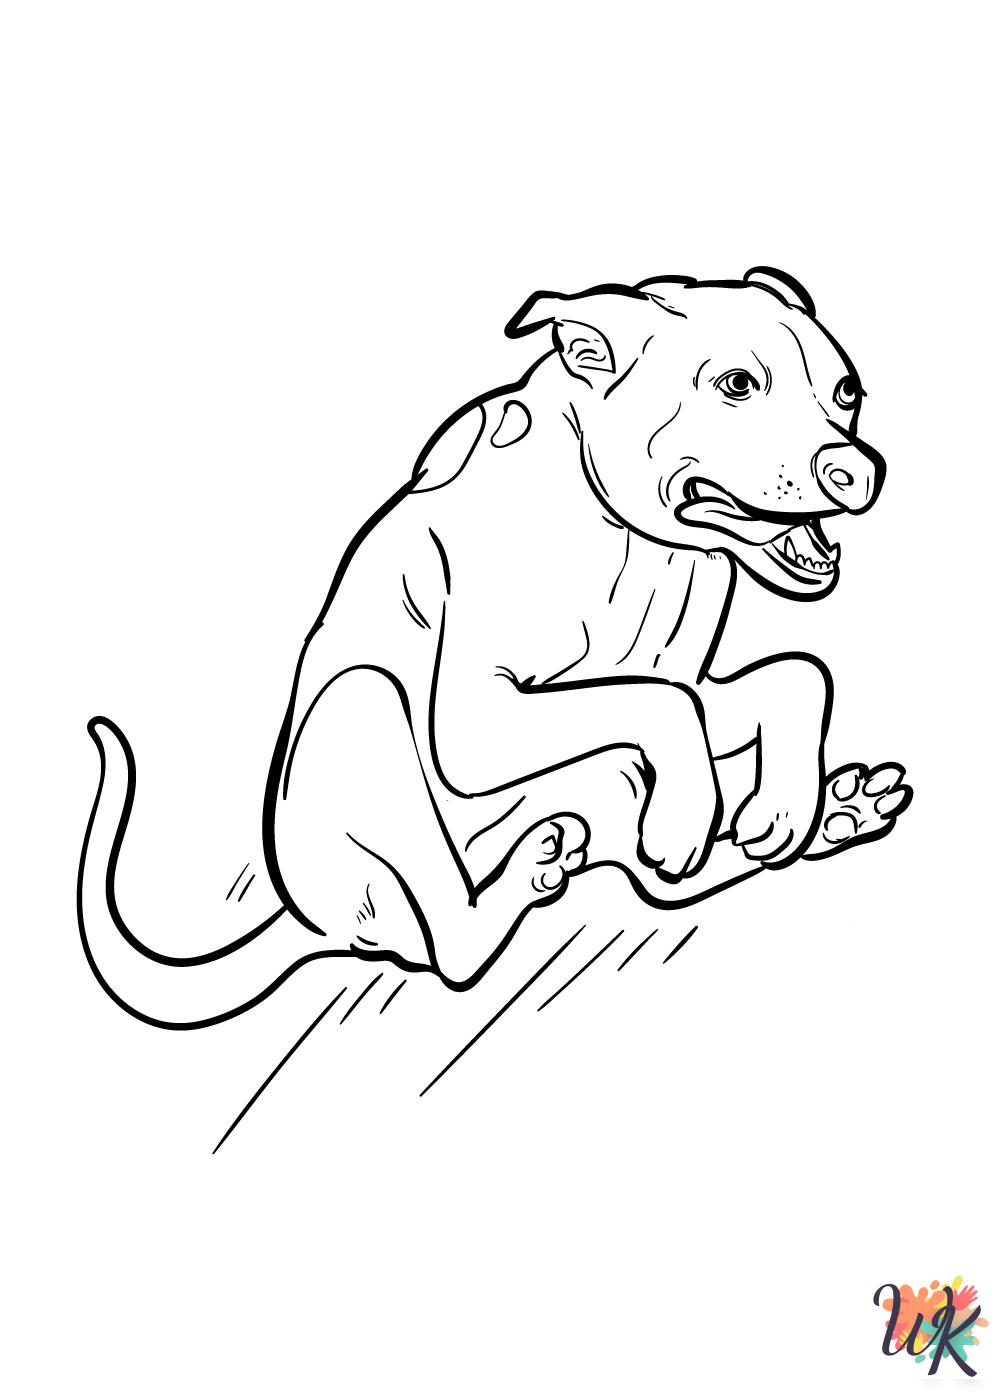 Dogs ornaments coloring pages